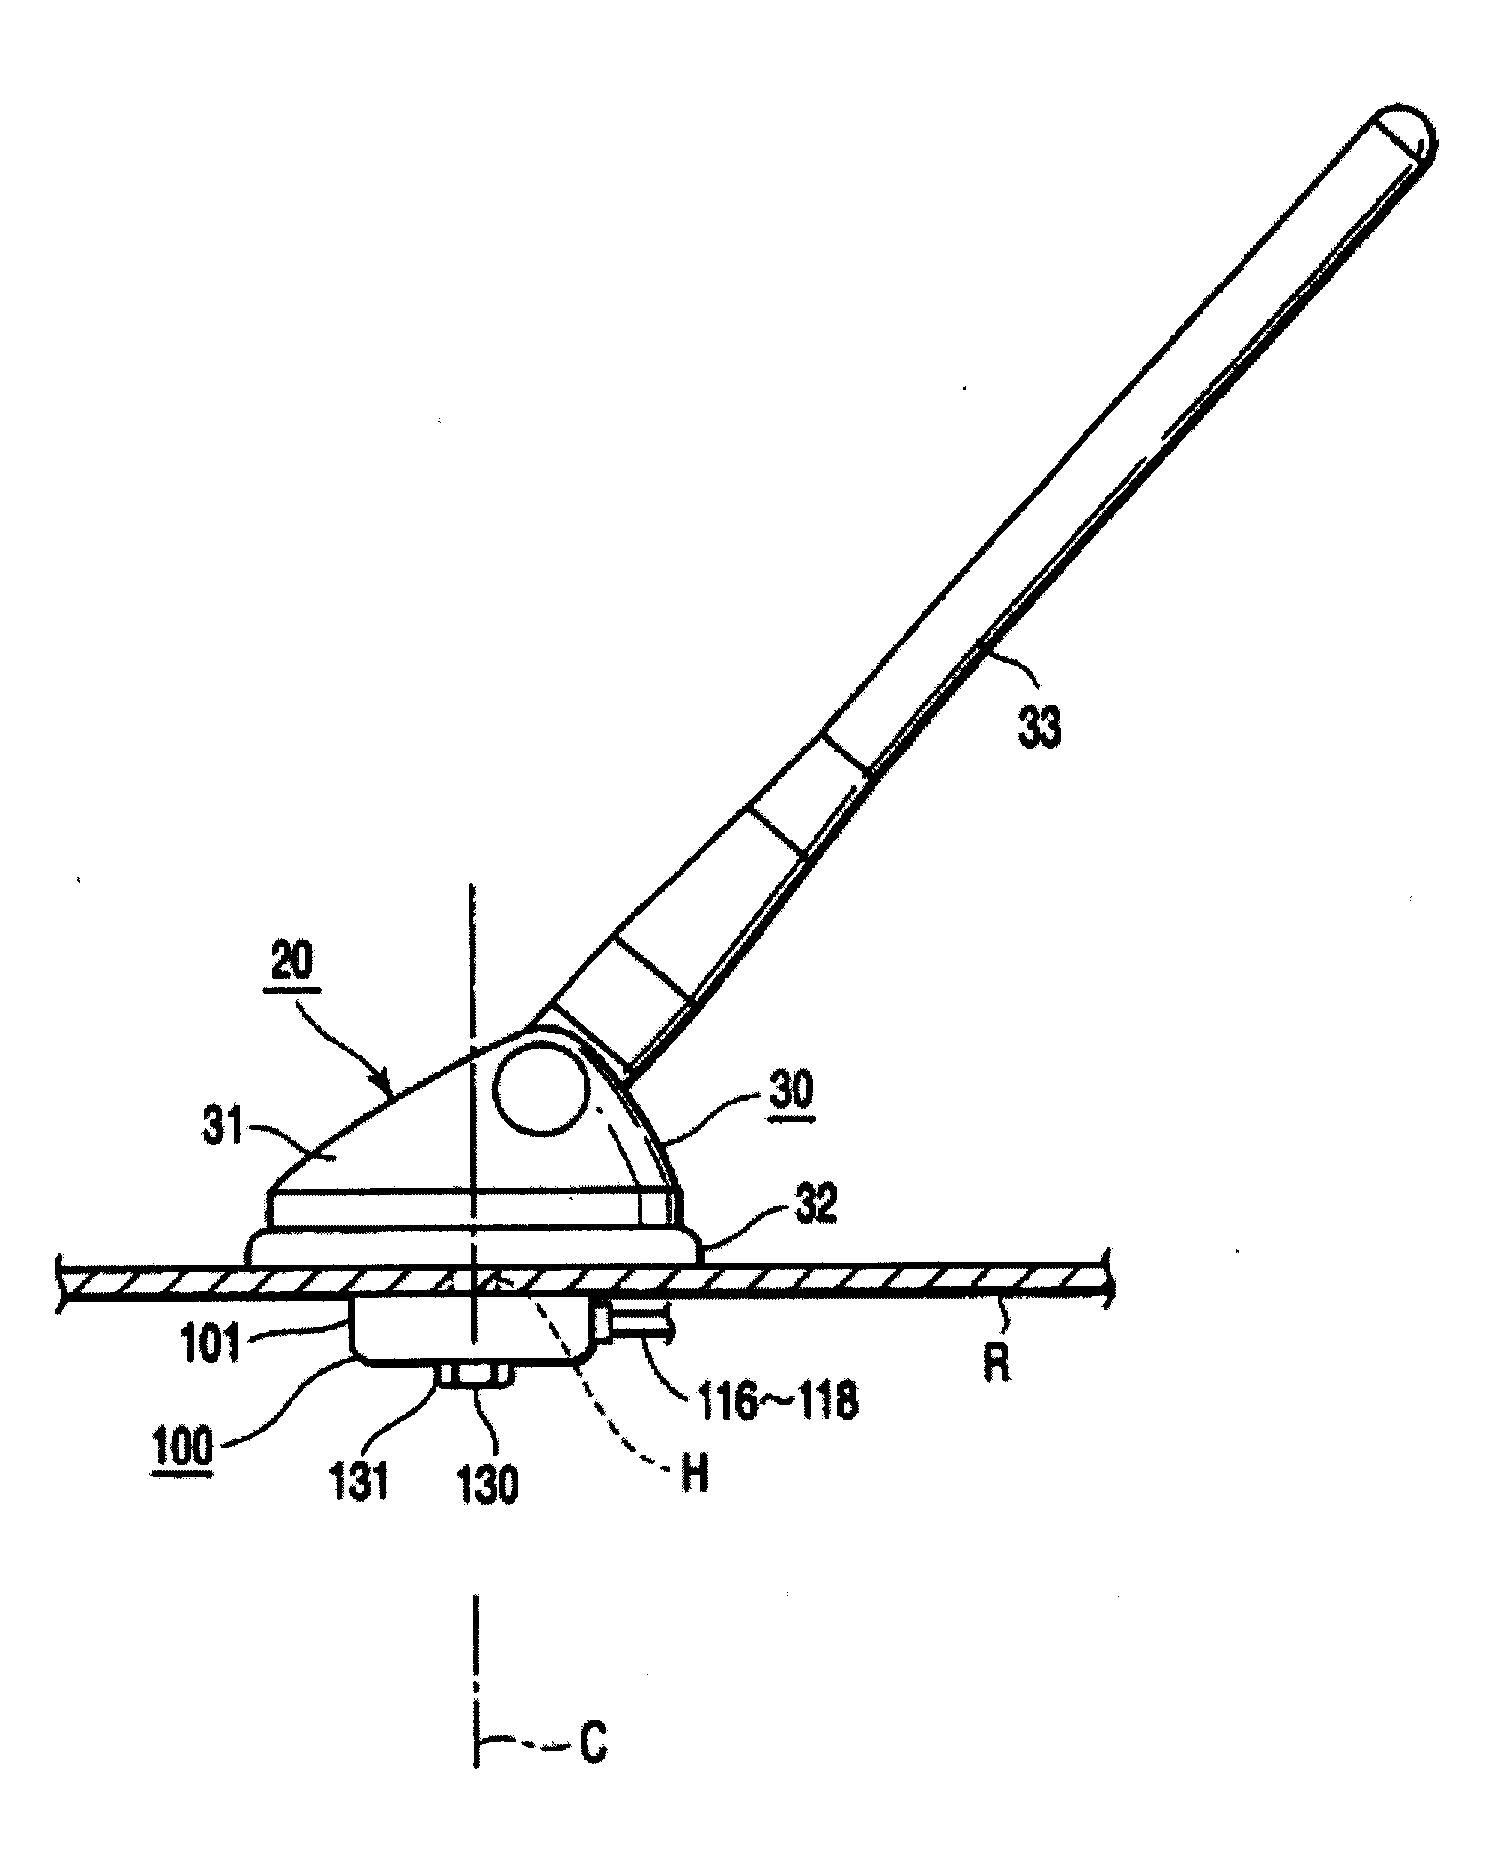 Antenna device having a non-electrical engagement during pre-lock